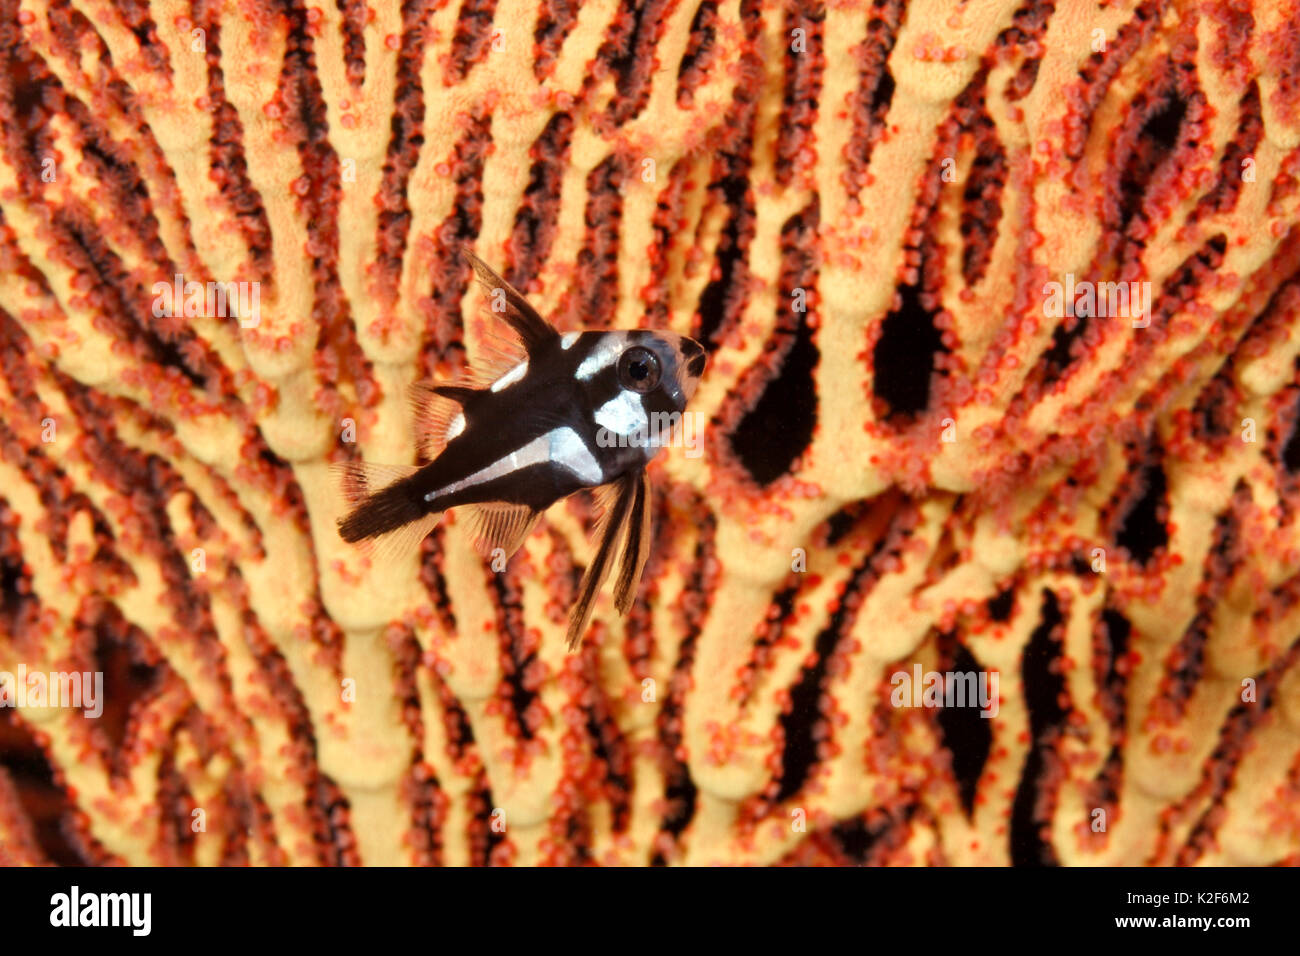 Juvenile Midnight Snapper, Macolor macularis, swimming in front of sea fan. Uepi, Stock Photo